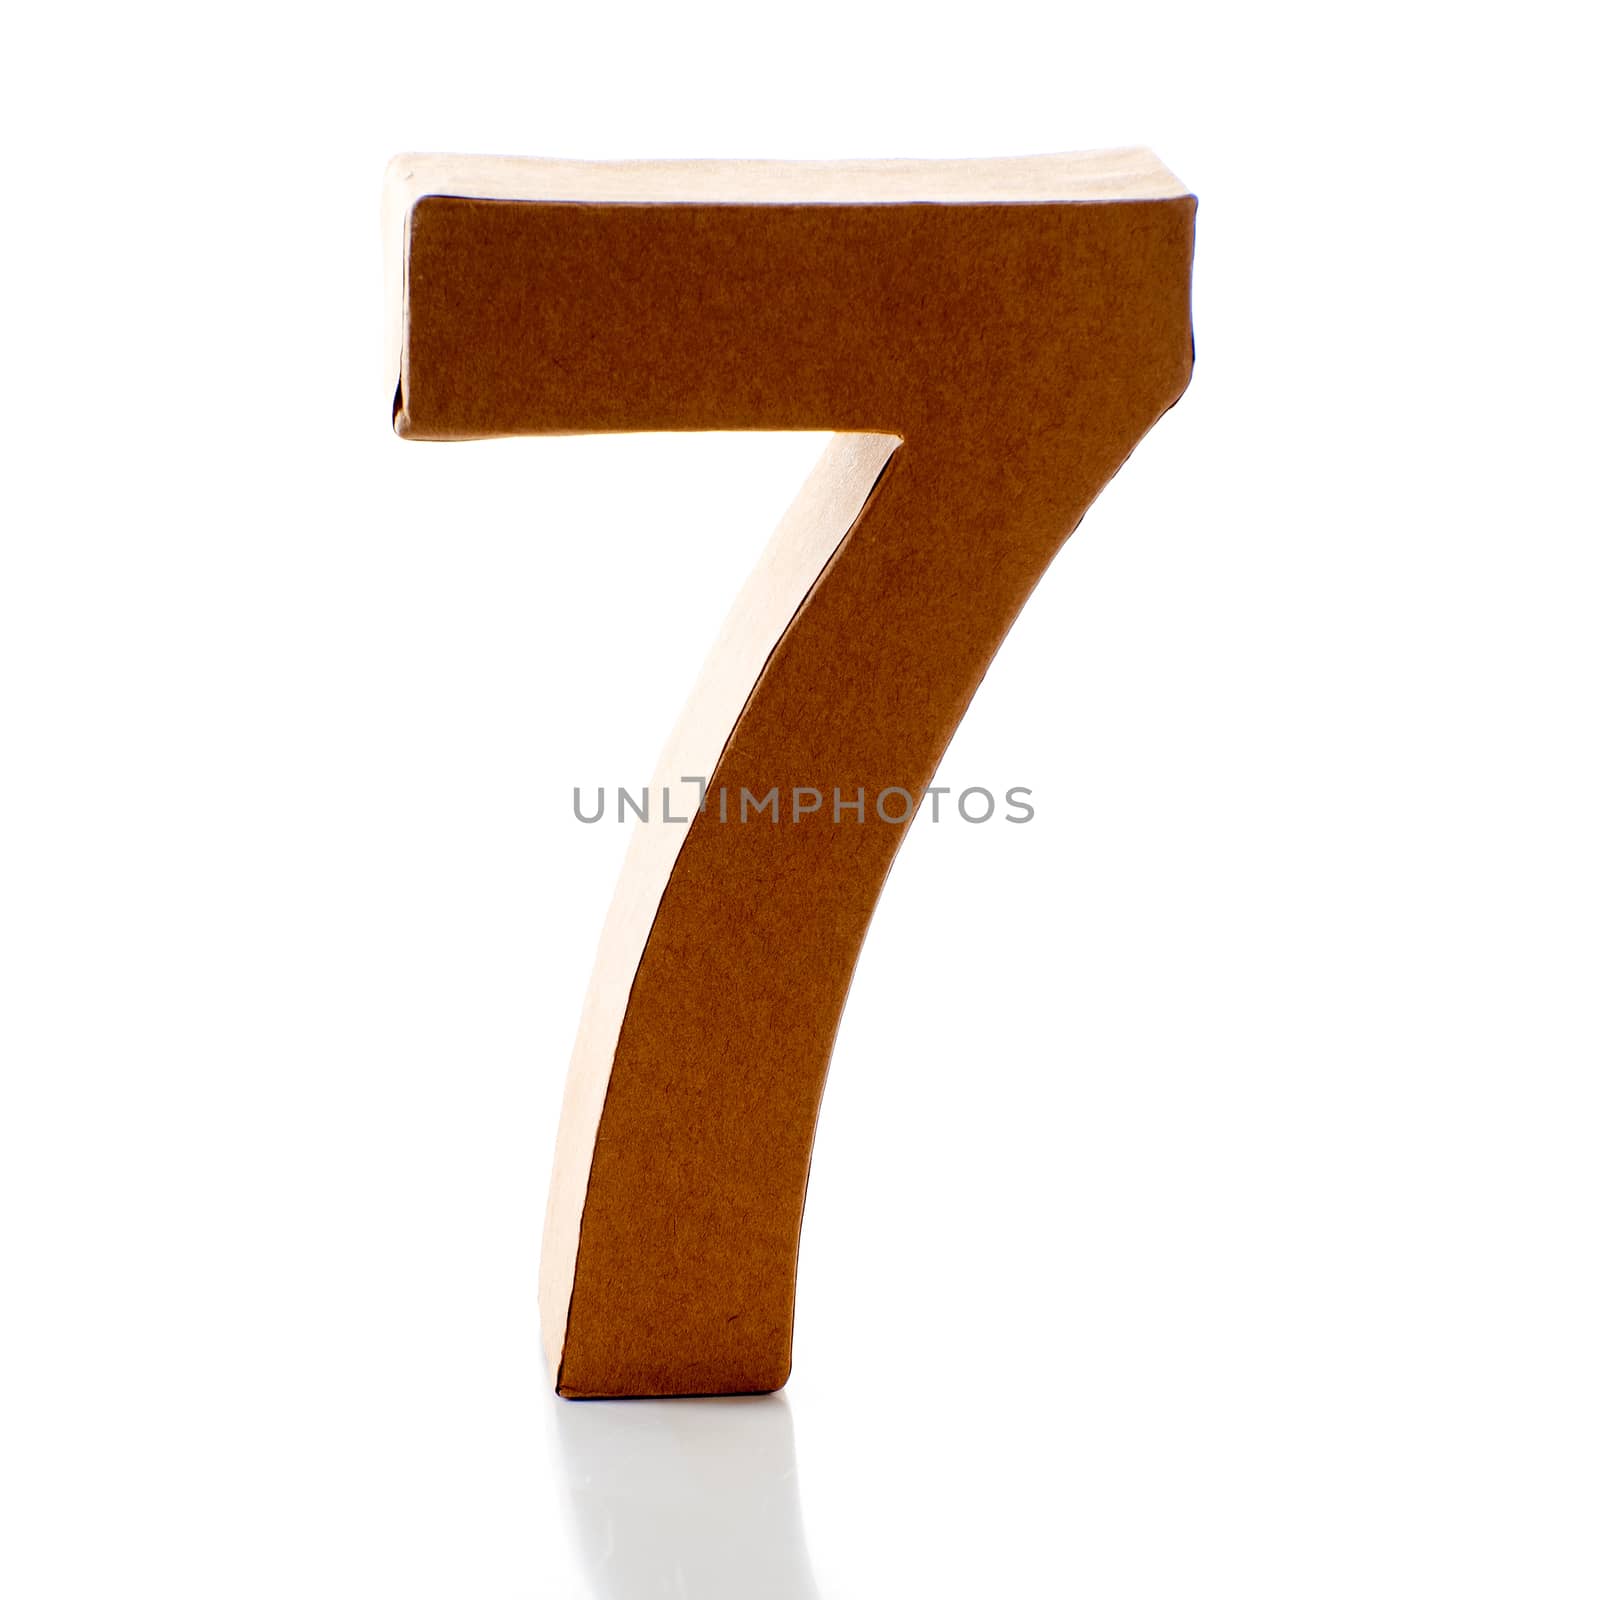 Number Seven on a white background